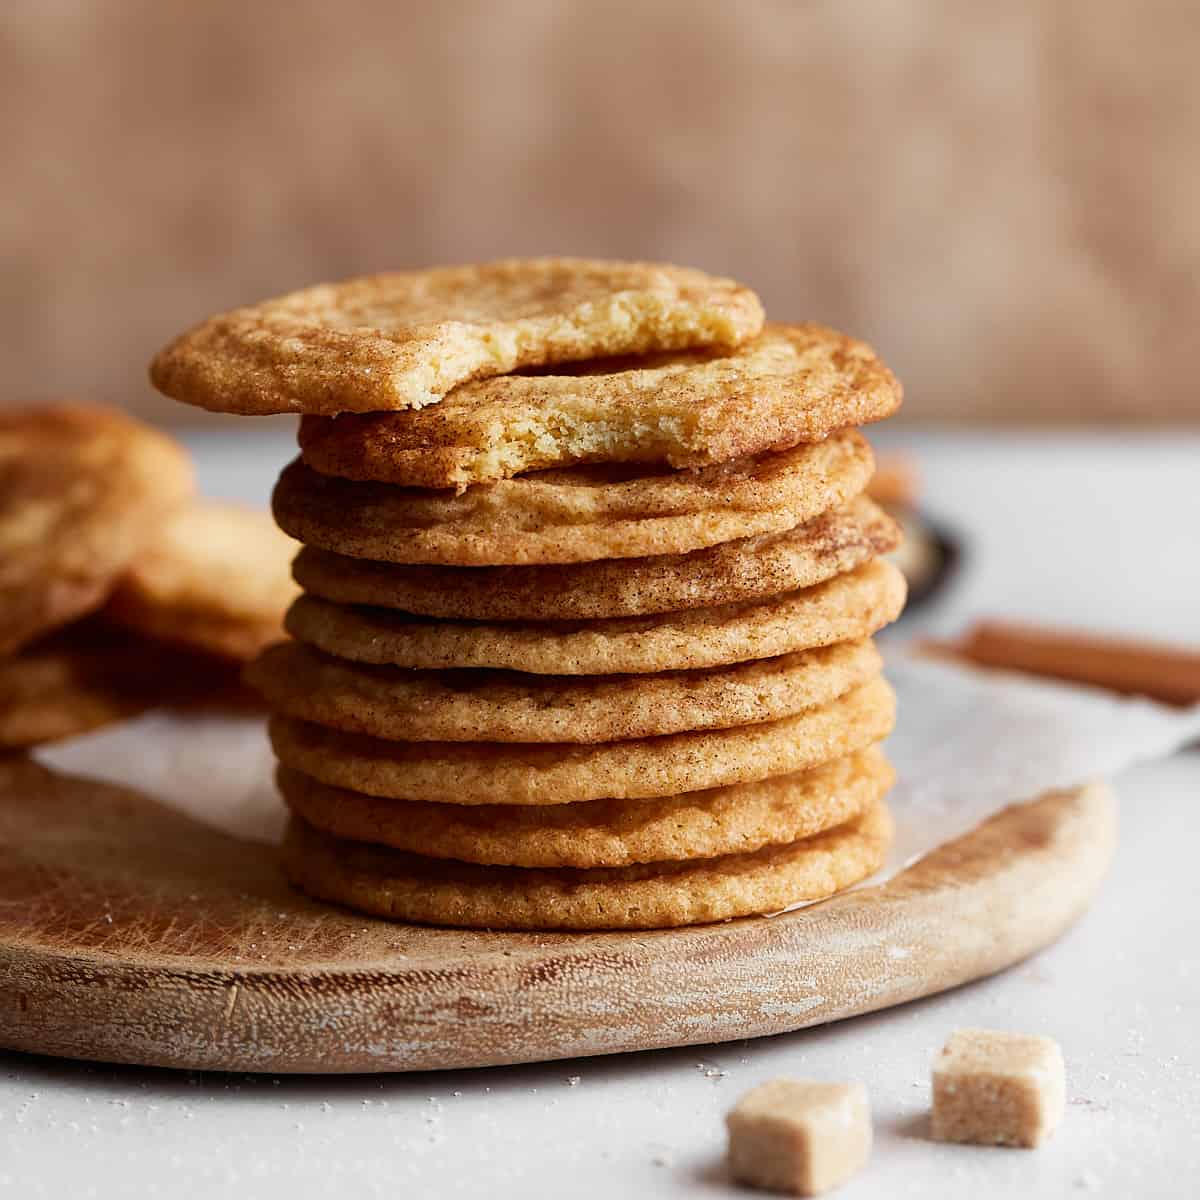 A stack of cookies on a wooden board with sugar and cinnamon decoration around it